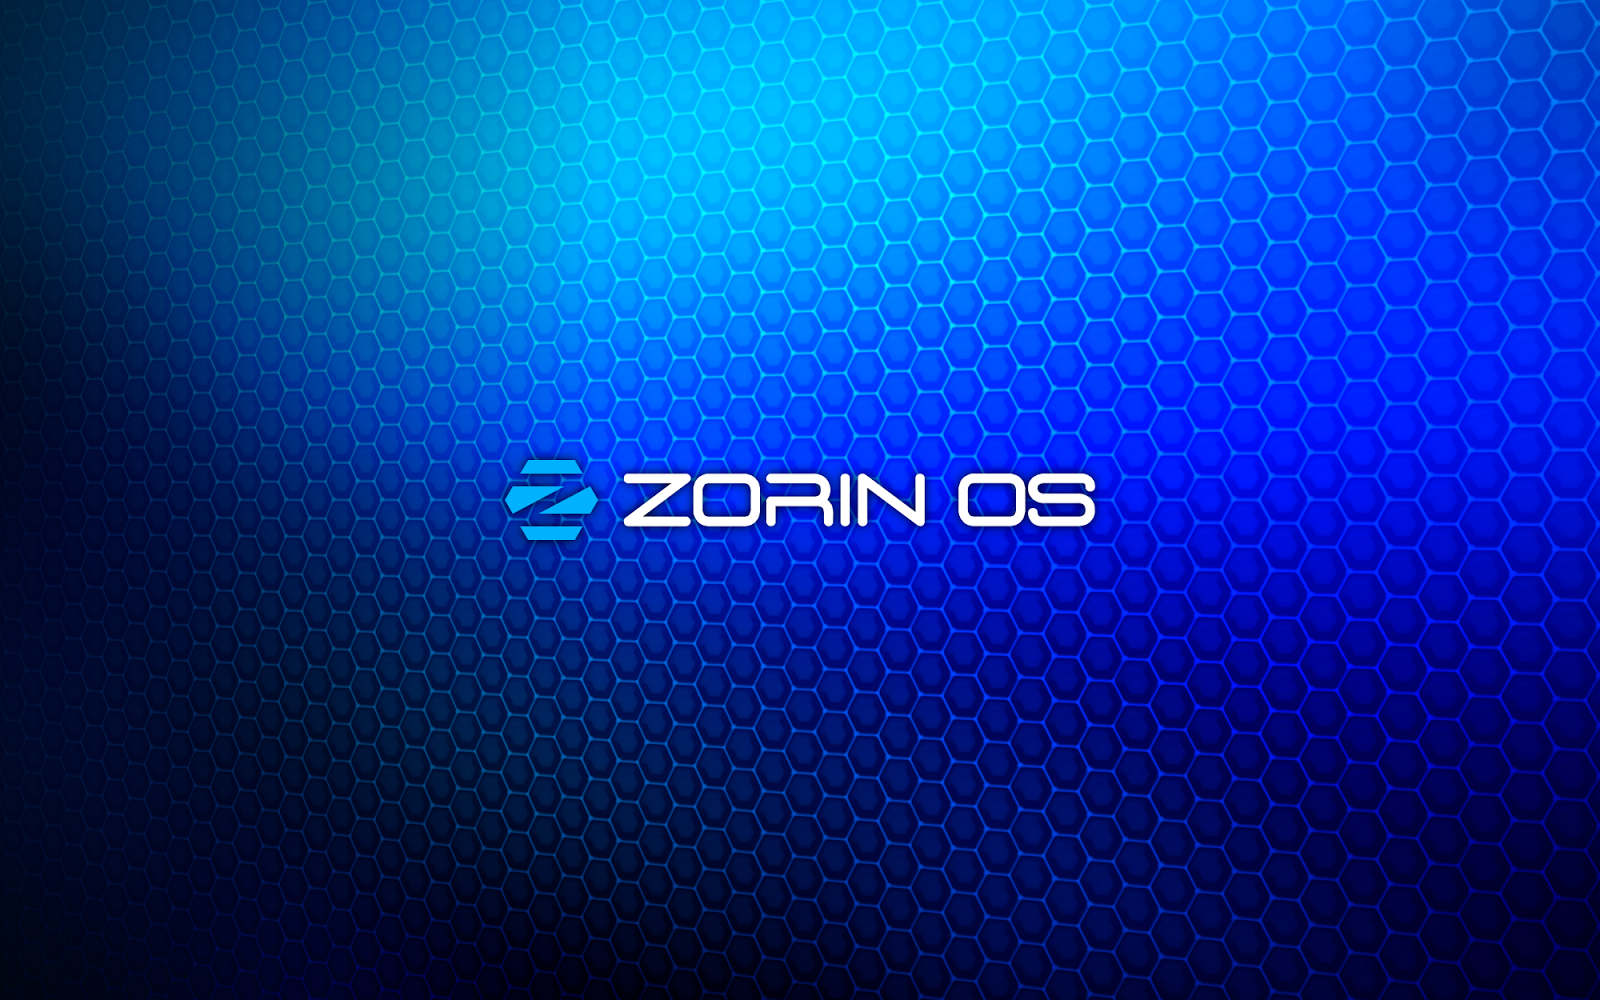 Linux Zorin Os Is Pretty Awesome Distribution, Perfect Os Wallpaper & Background Download